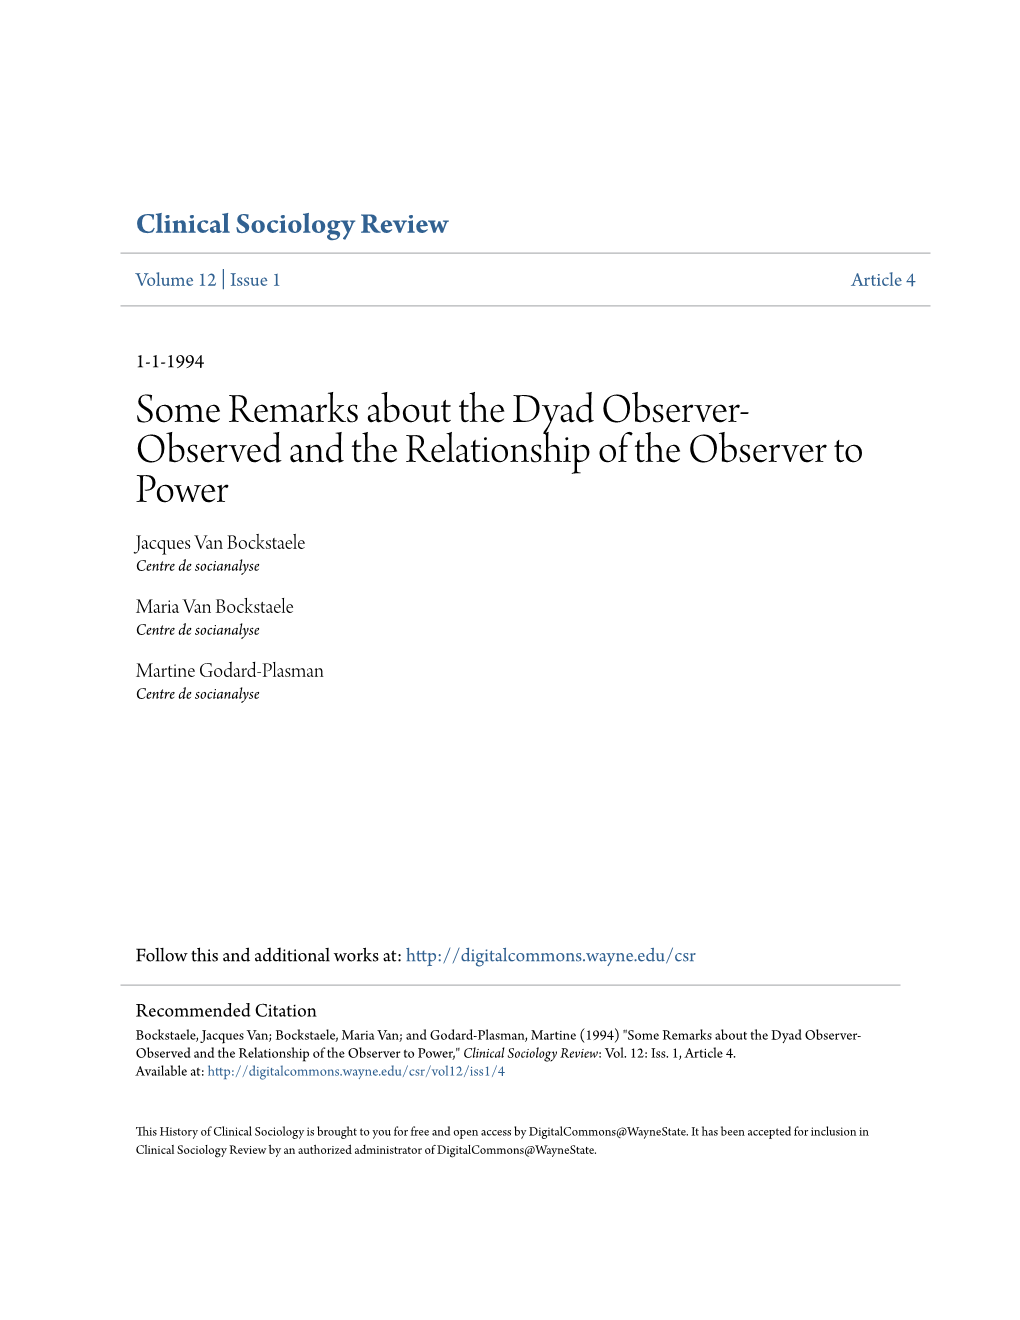 Some Remarks About the Dyad Observer-Observed and the Relationship of the Observer to Power